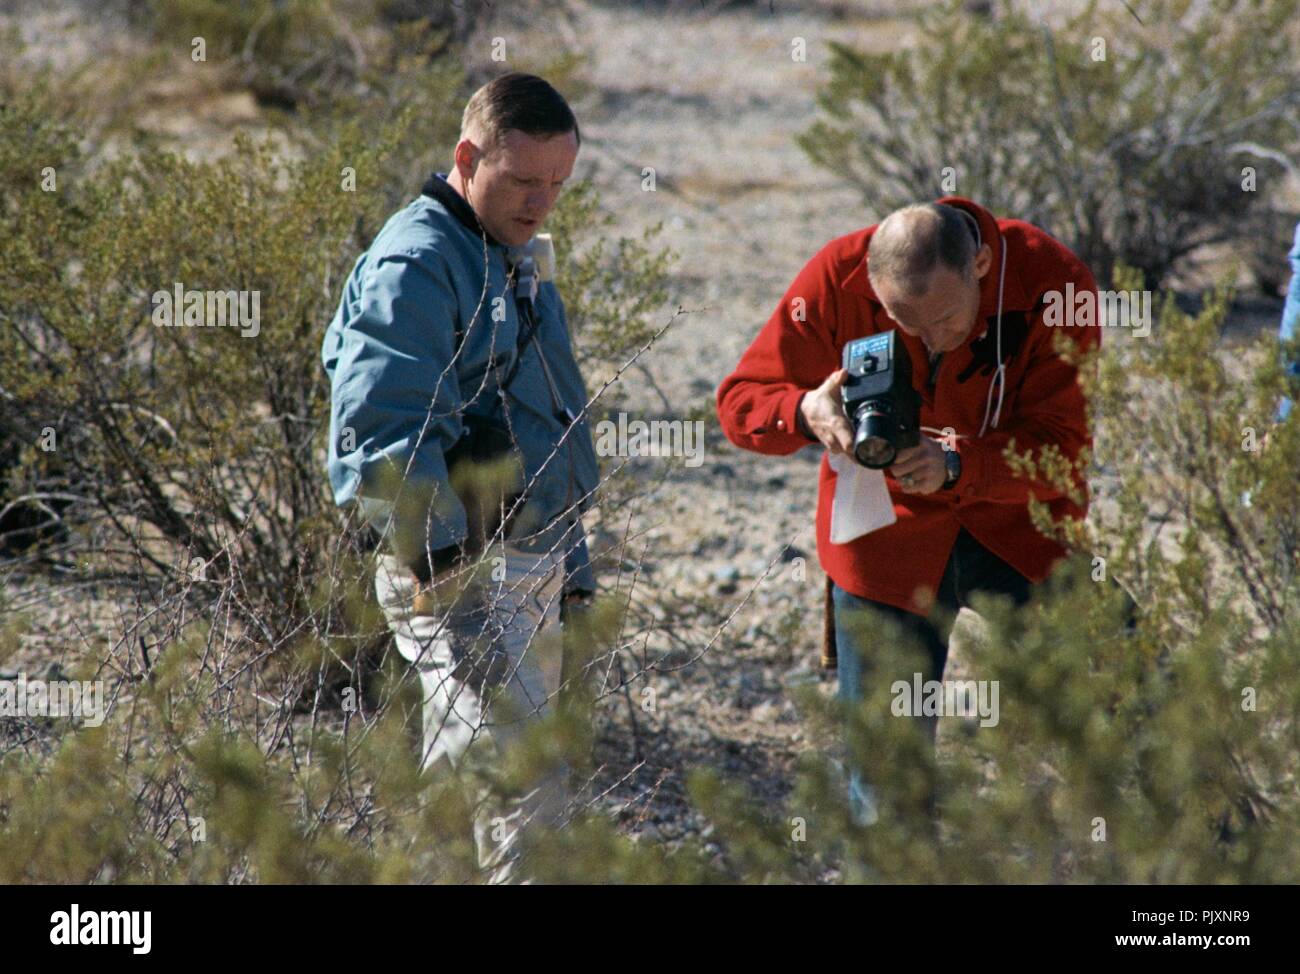 Sierra Blanca, TX - (FILE) -- Apollo 11 astronauts Neil Armstrong & Buzz Aldrin participate in a geology field trip at Sierra Blanca, Texas  as part of their training for their upcoming mission to land on the Moon on Monday, February 24, 1969 Credit: NASA via CNP /MediaPunch Stock Photo